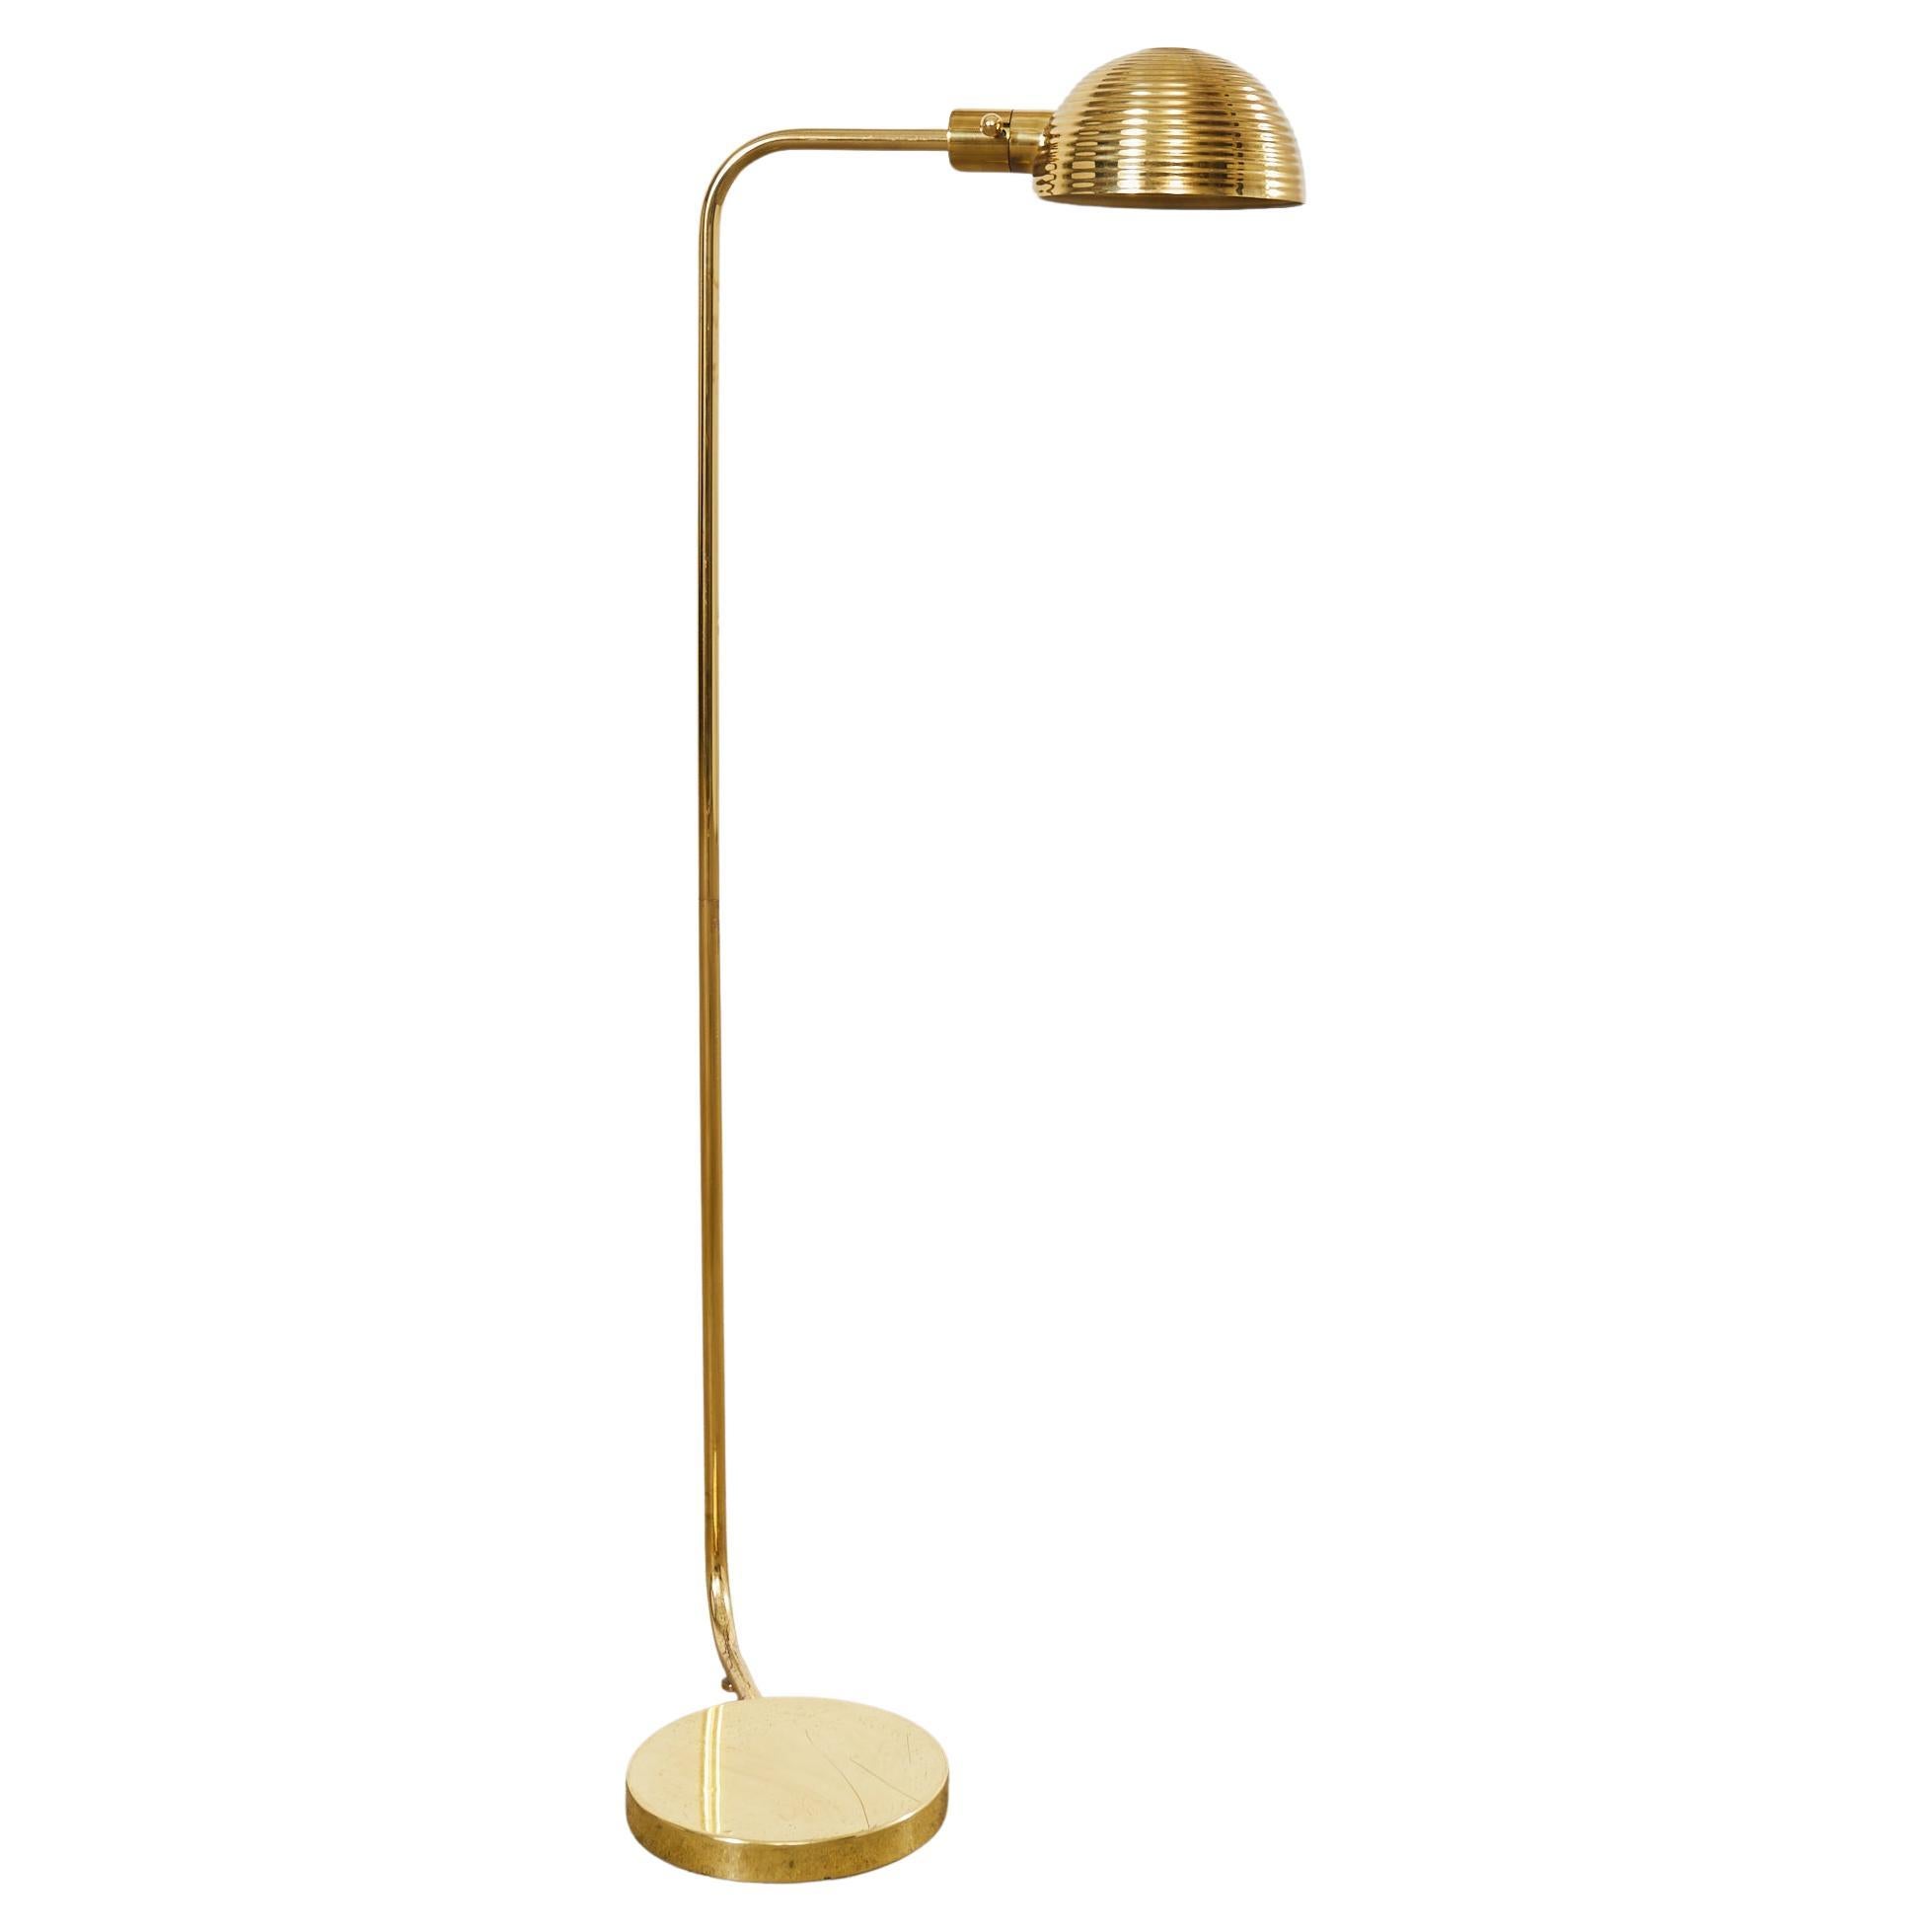 Art Deco Style Polished Brass Task Floor Lamp For Sale